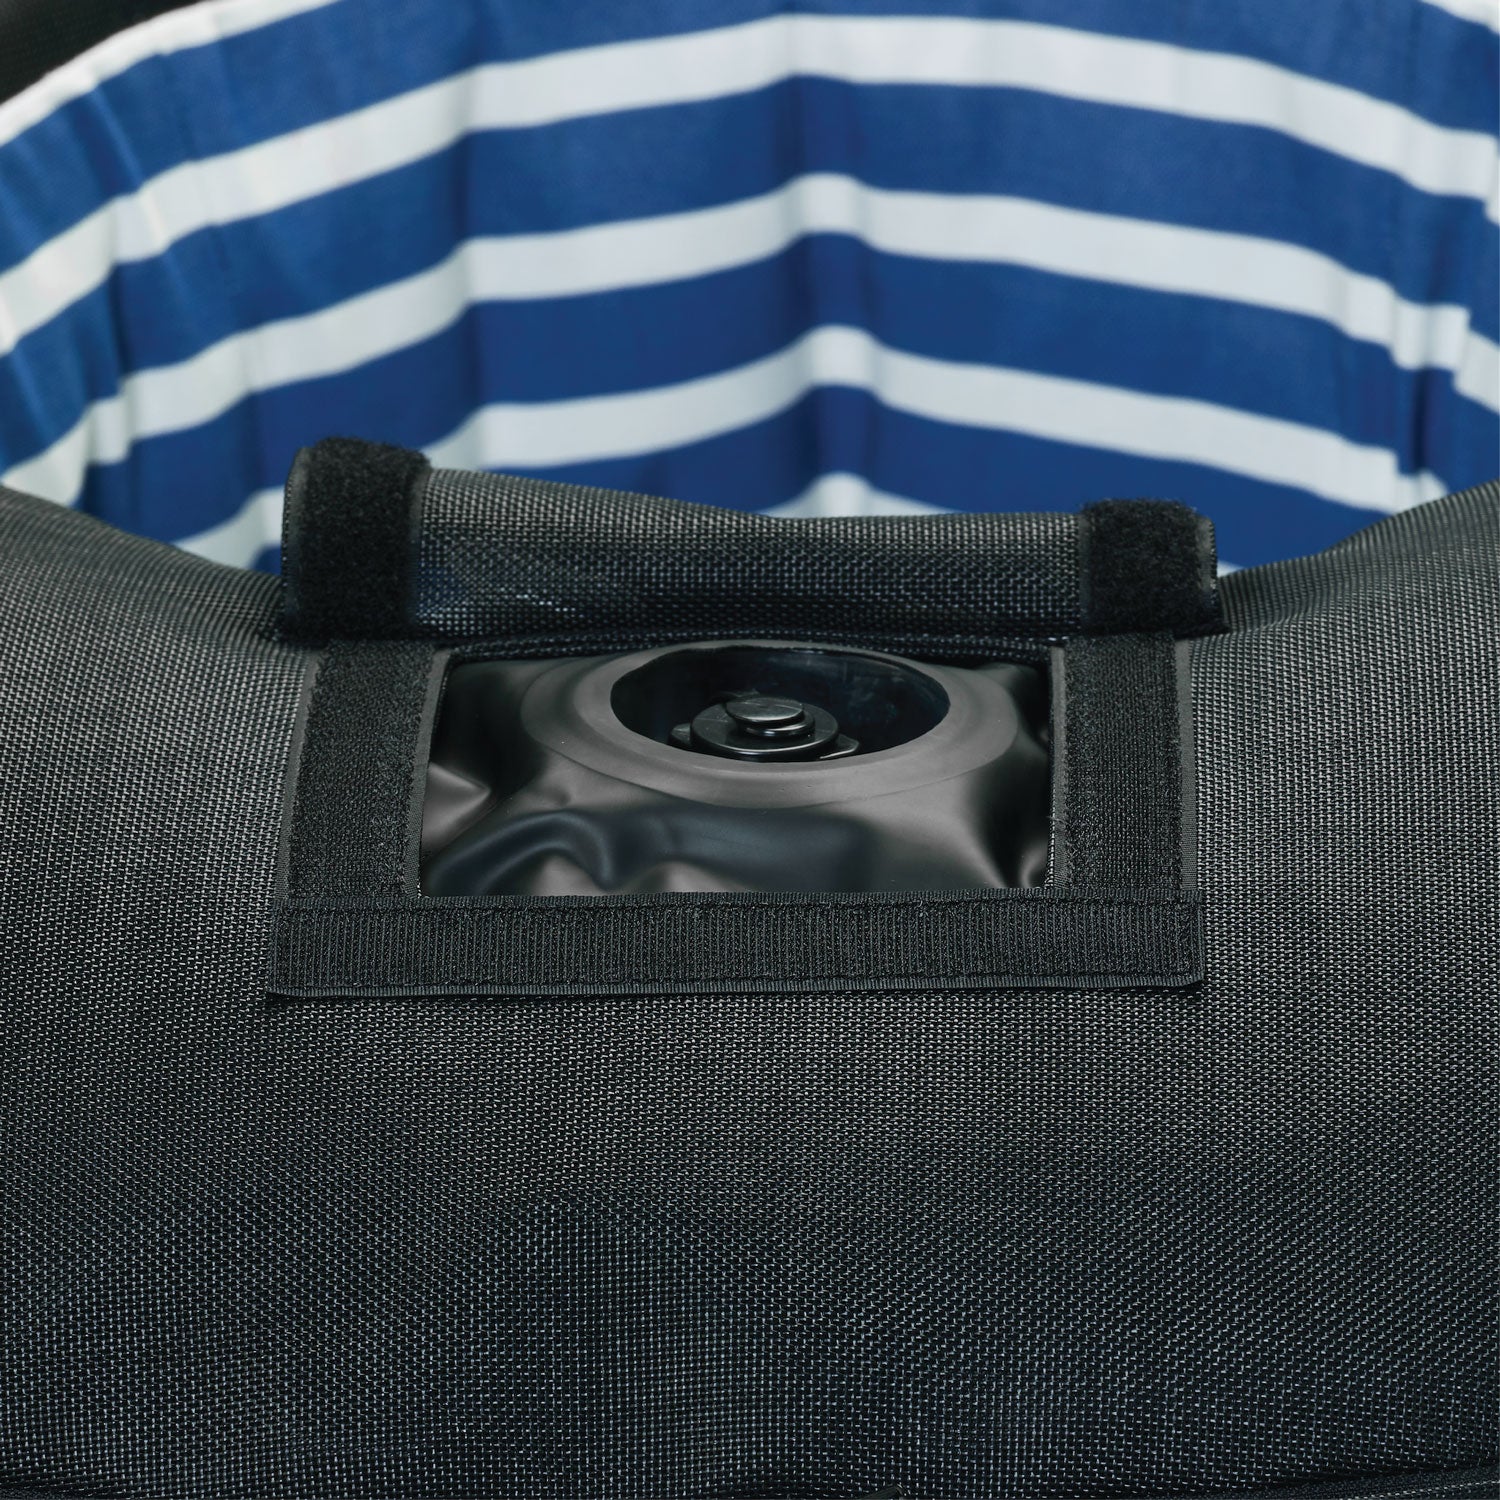 A ring luxury lilo in blue and white stripe upside down displaying the base and velcro window to access the boston valve.